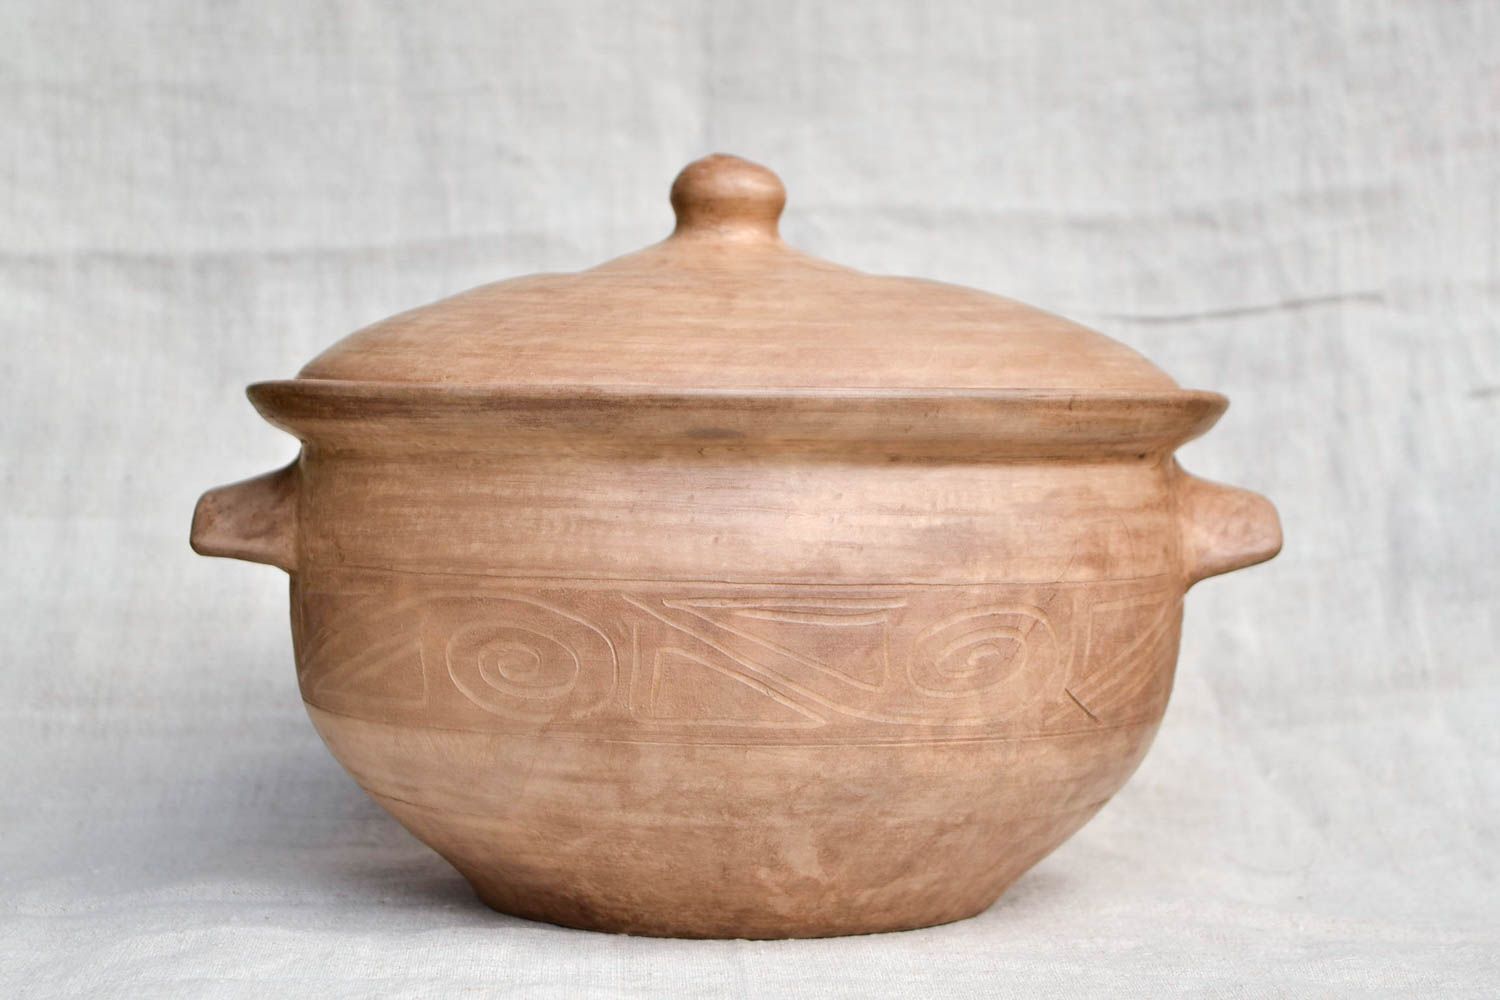 120 oz ceramic Korean style stew pot for cooking with handles and lid 5 lb photo 4